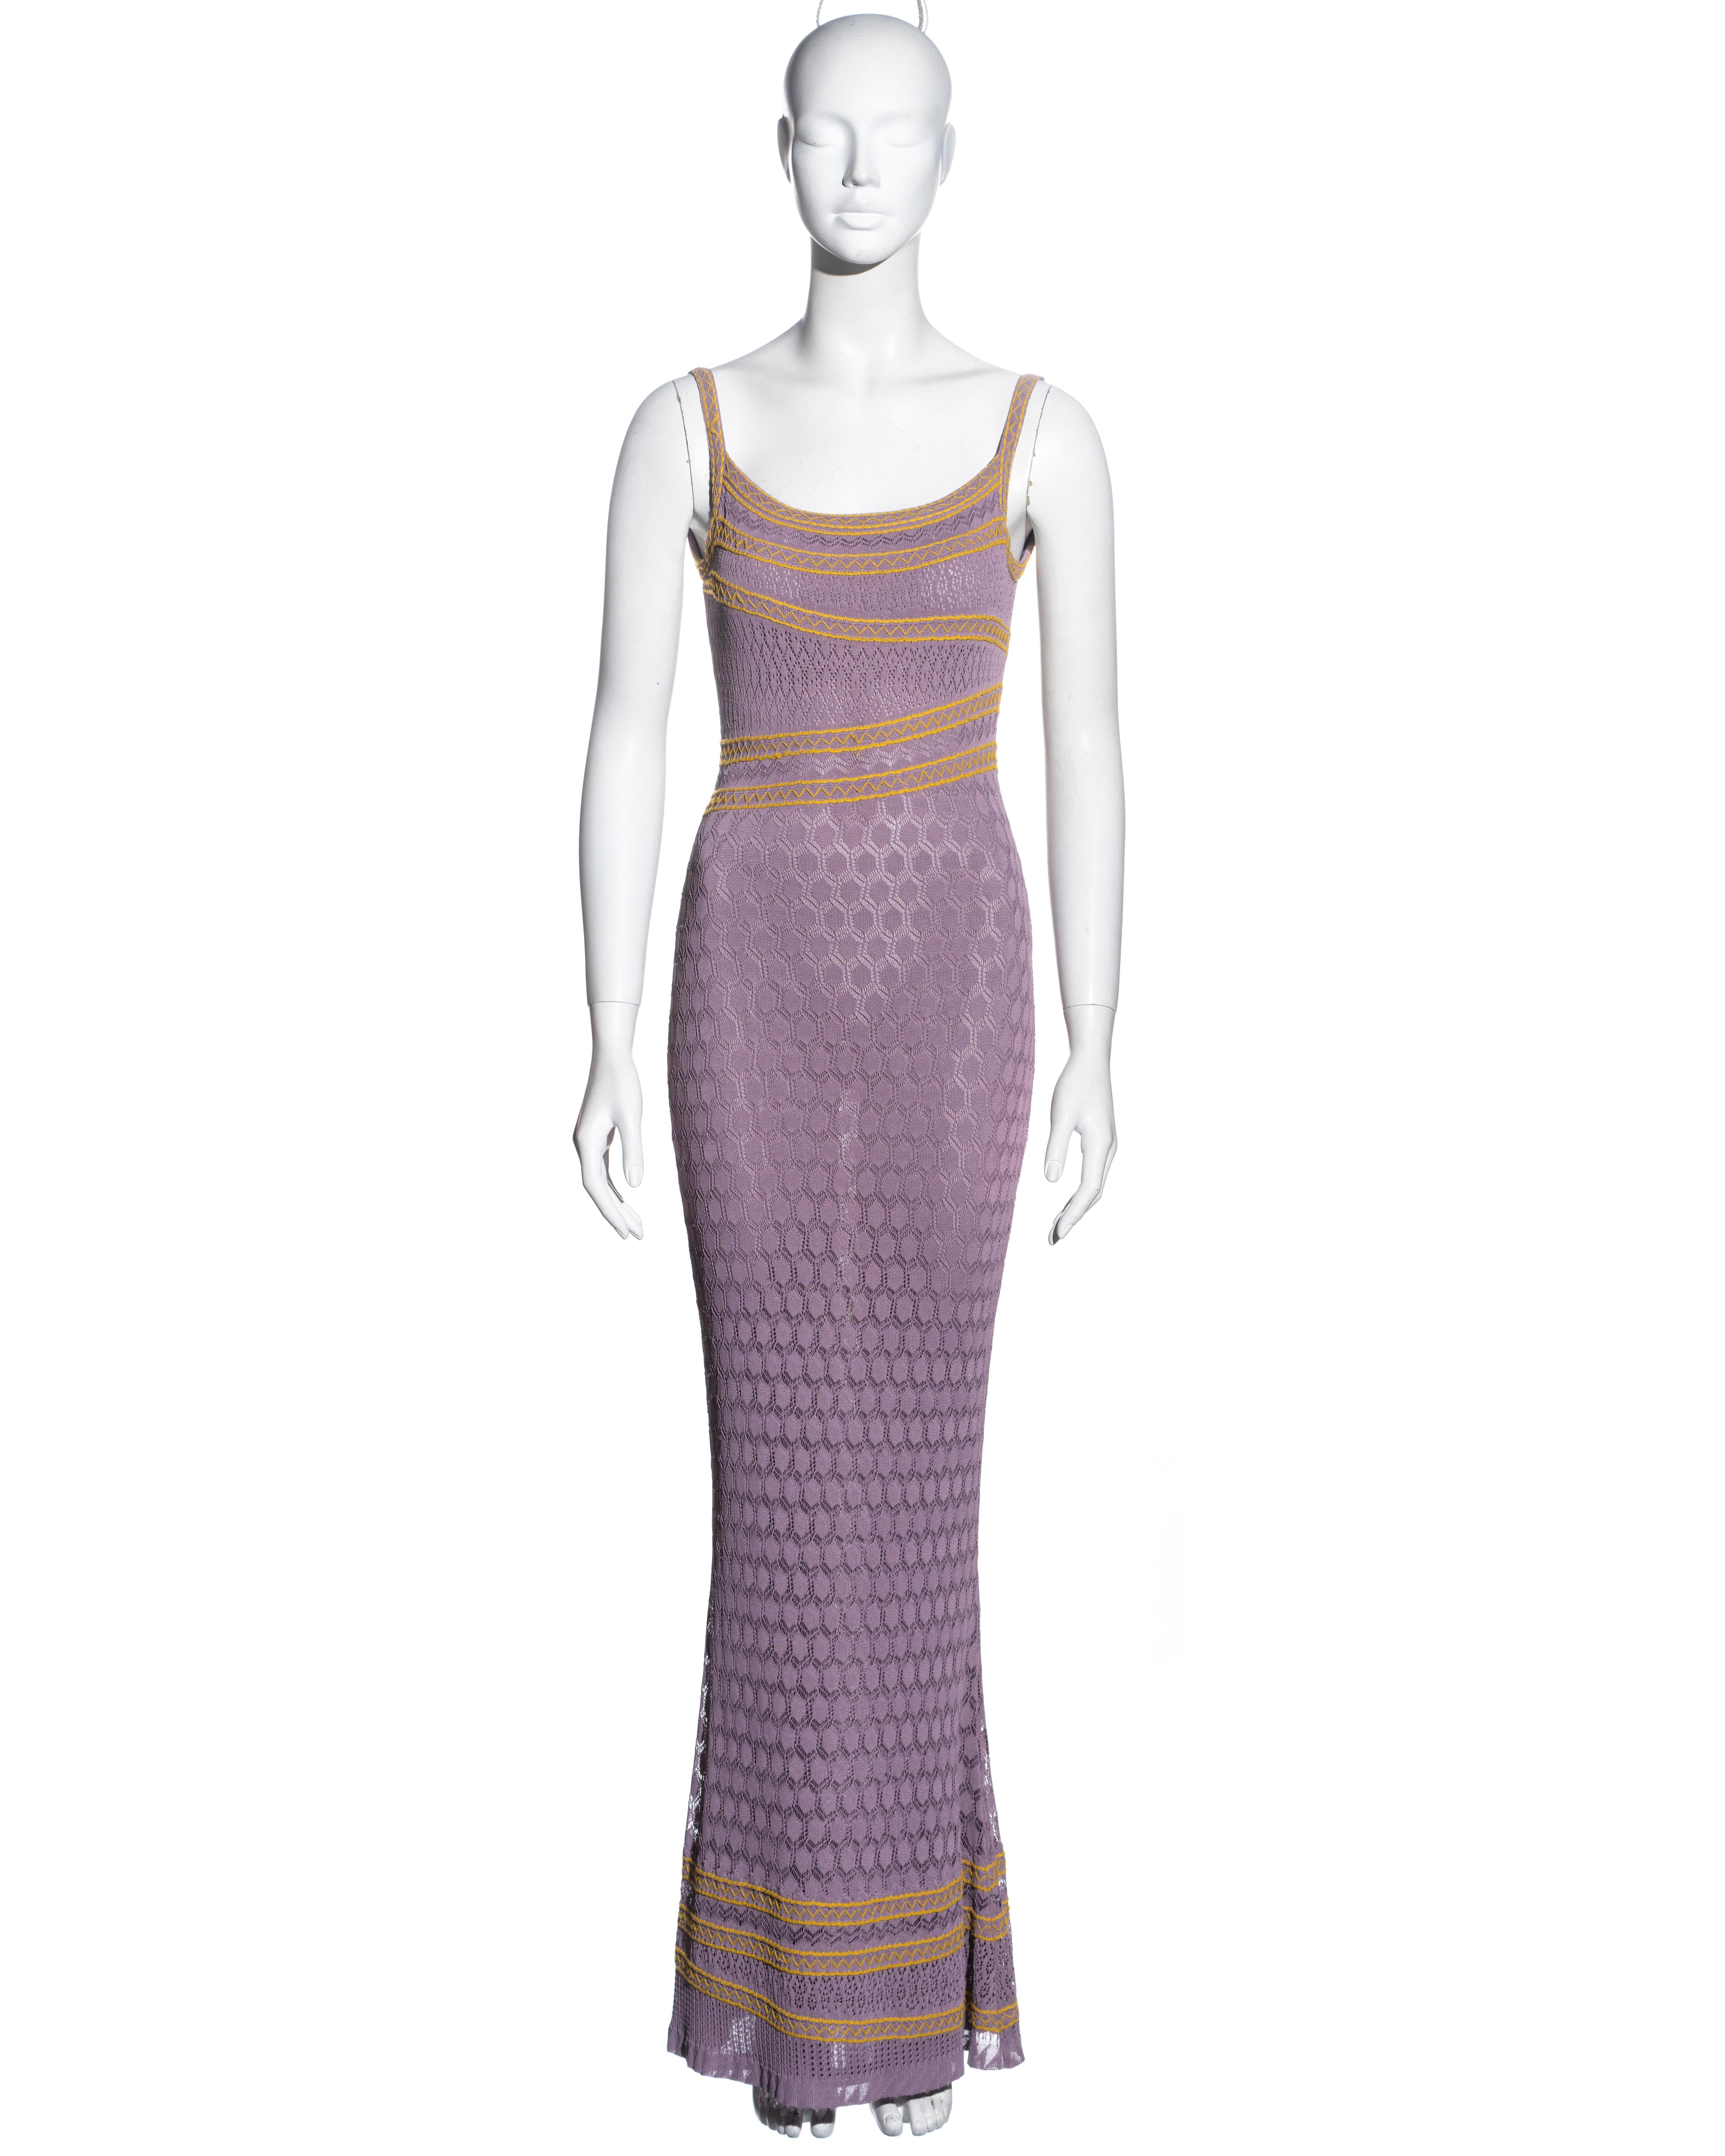 ▪ Christian Dior maxi dress
▪ Designed by John Galliano
▪ Lavender viscose crochet lace 
▪ Canary yellow zigzag stitch trimmings 
▪ Figure hugging 
▪ Rayon-knit underdress attached 
▪ Maxi-length 
▪ Size FR 40 
▪ Spring-Summer 2000
▪ 90% Viscose,